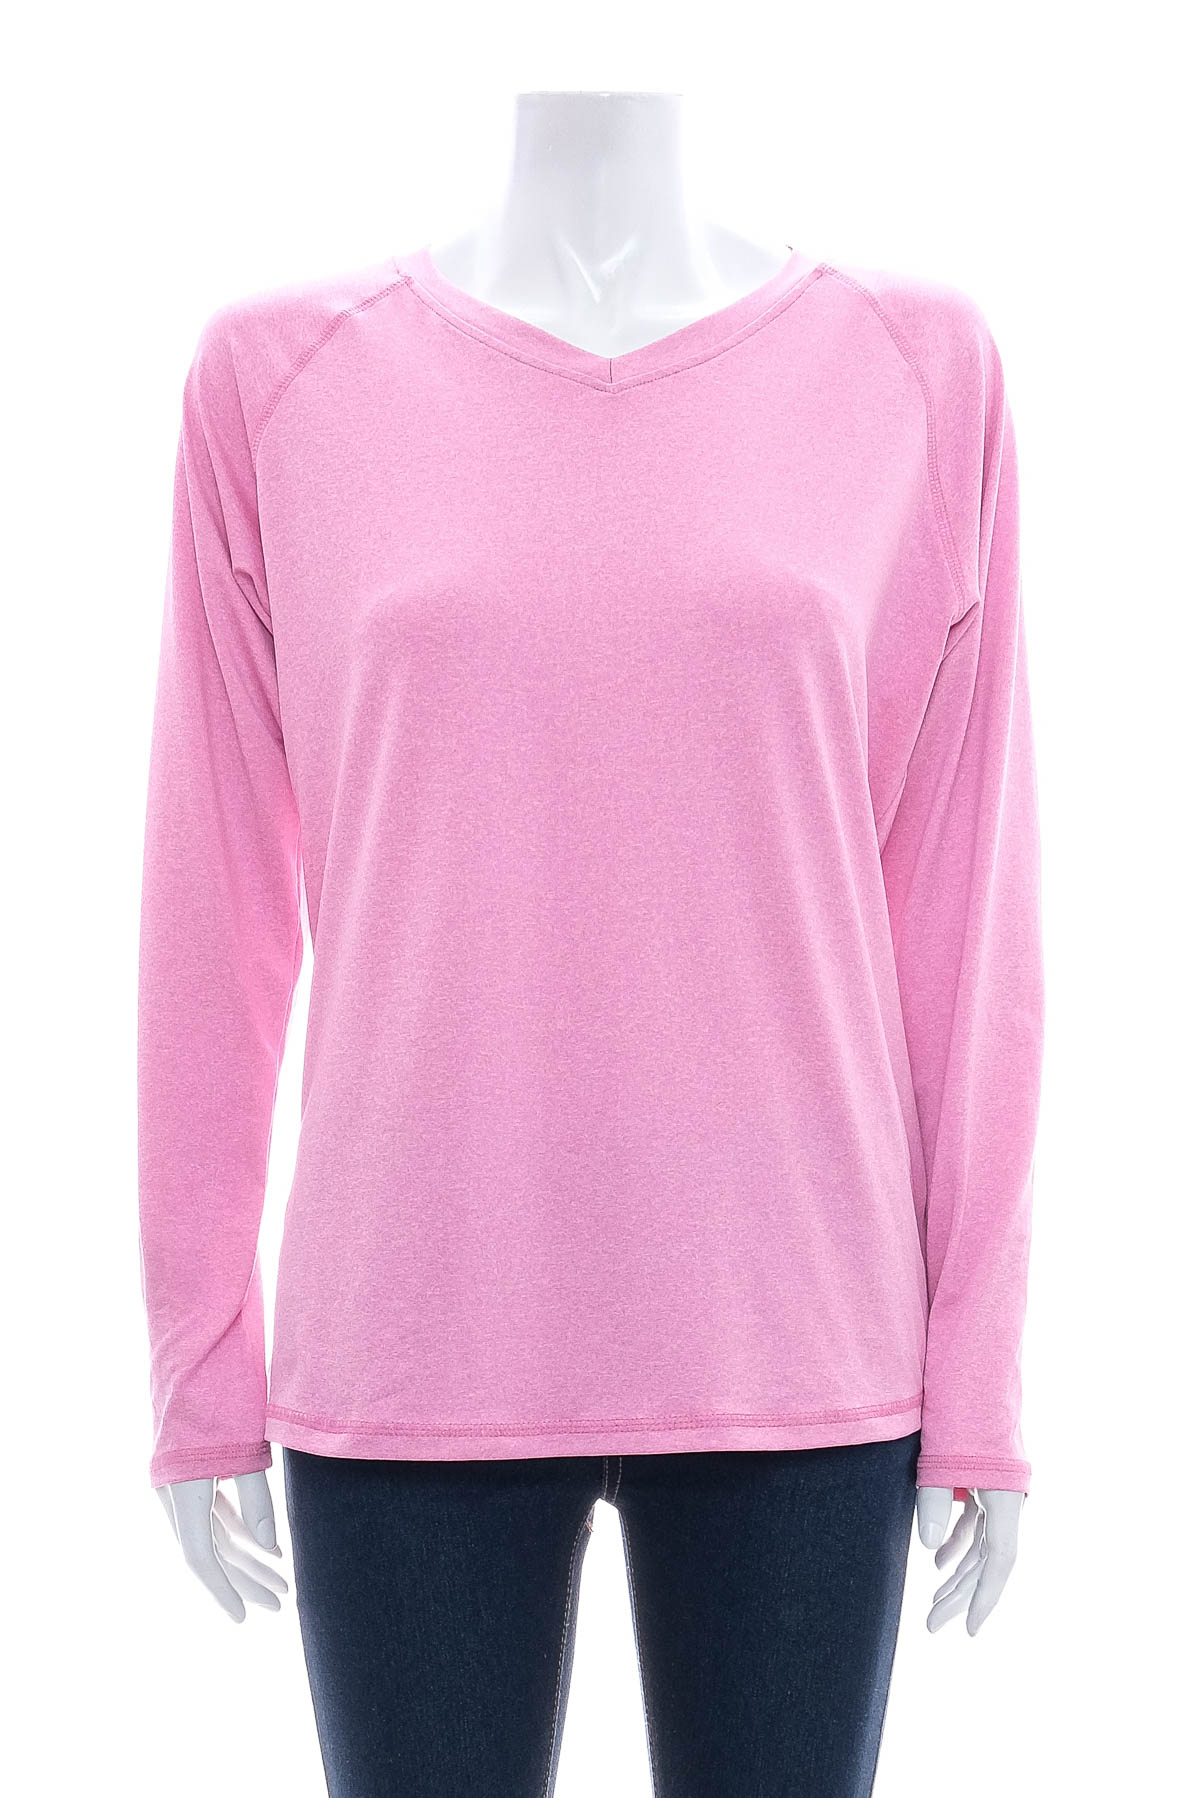 Women's blouse - Beverly Hills Polo Club - 0